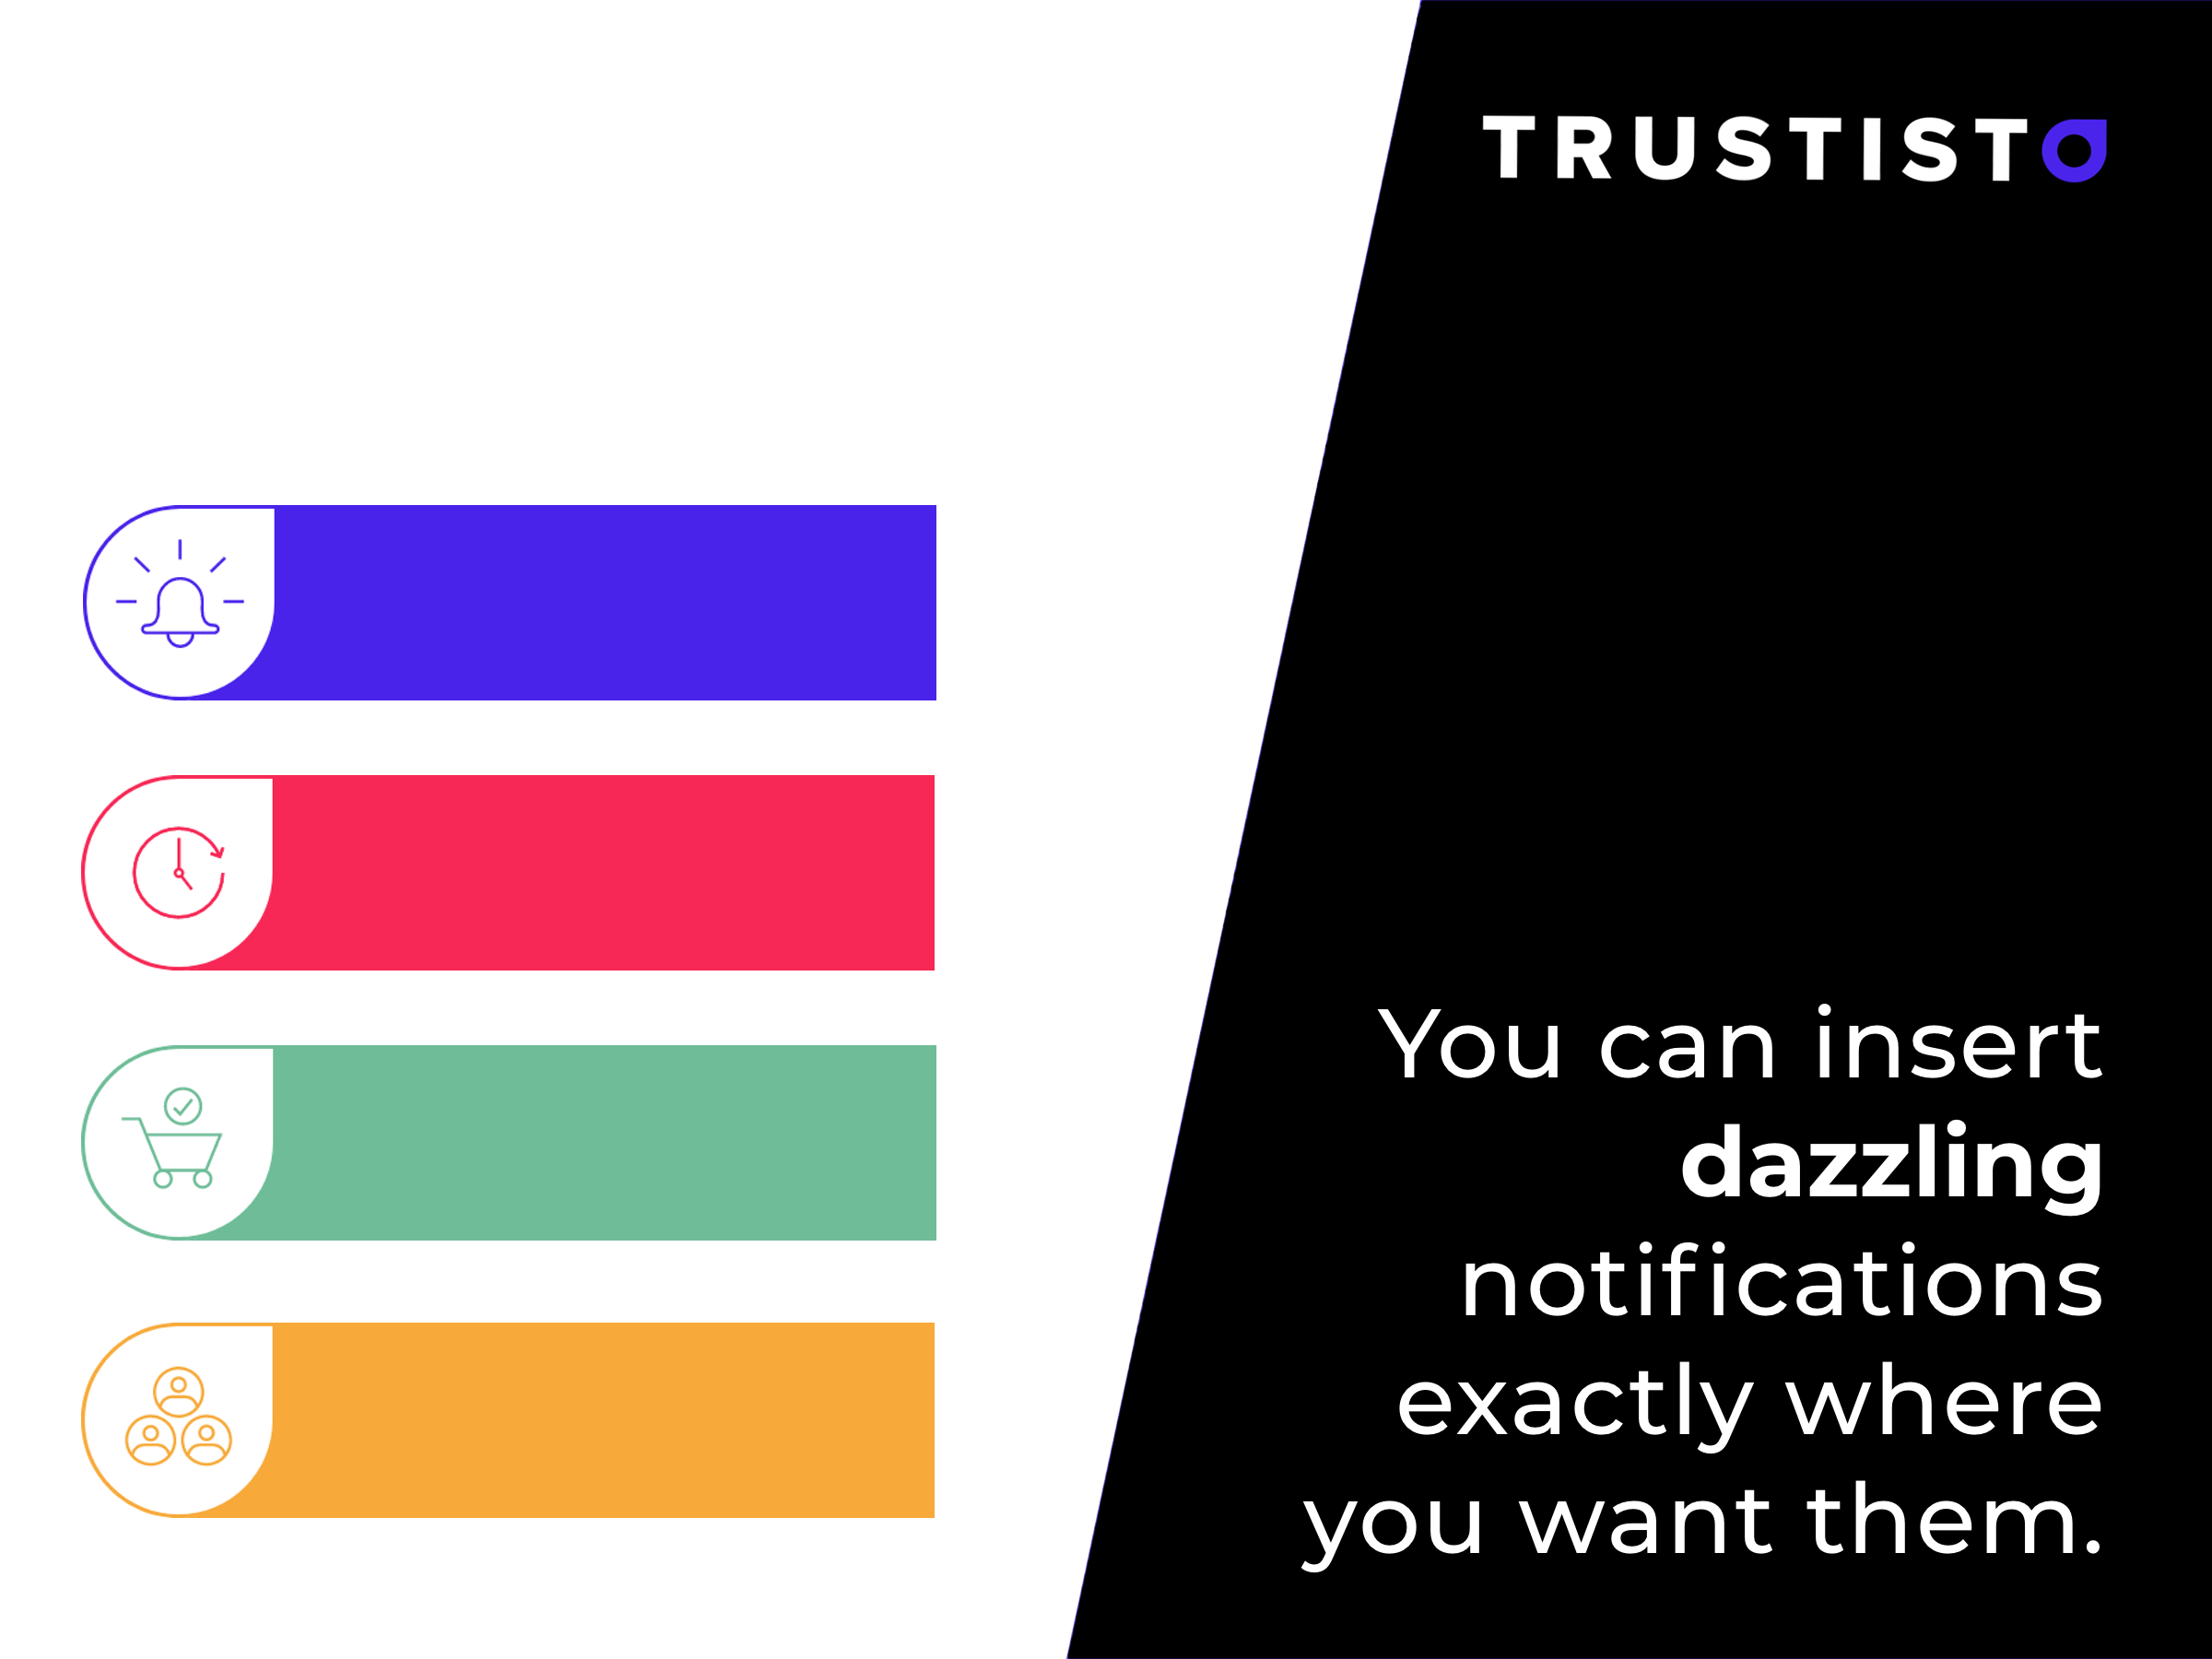 Find pricing, reviews and other details about Trustisto